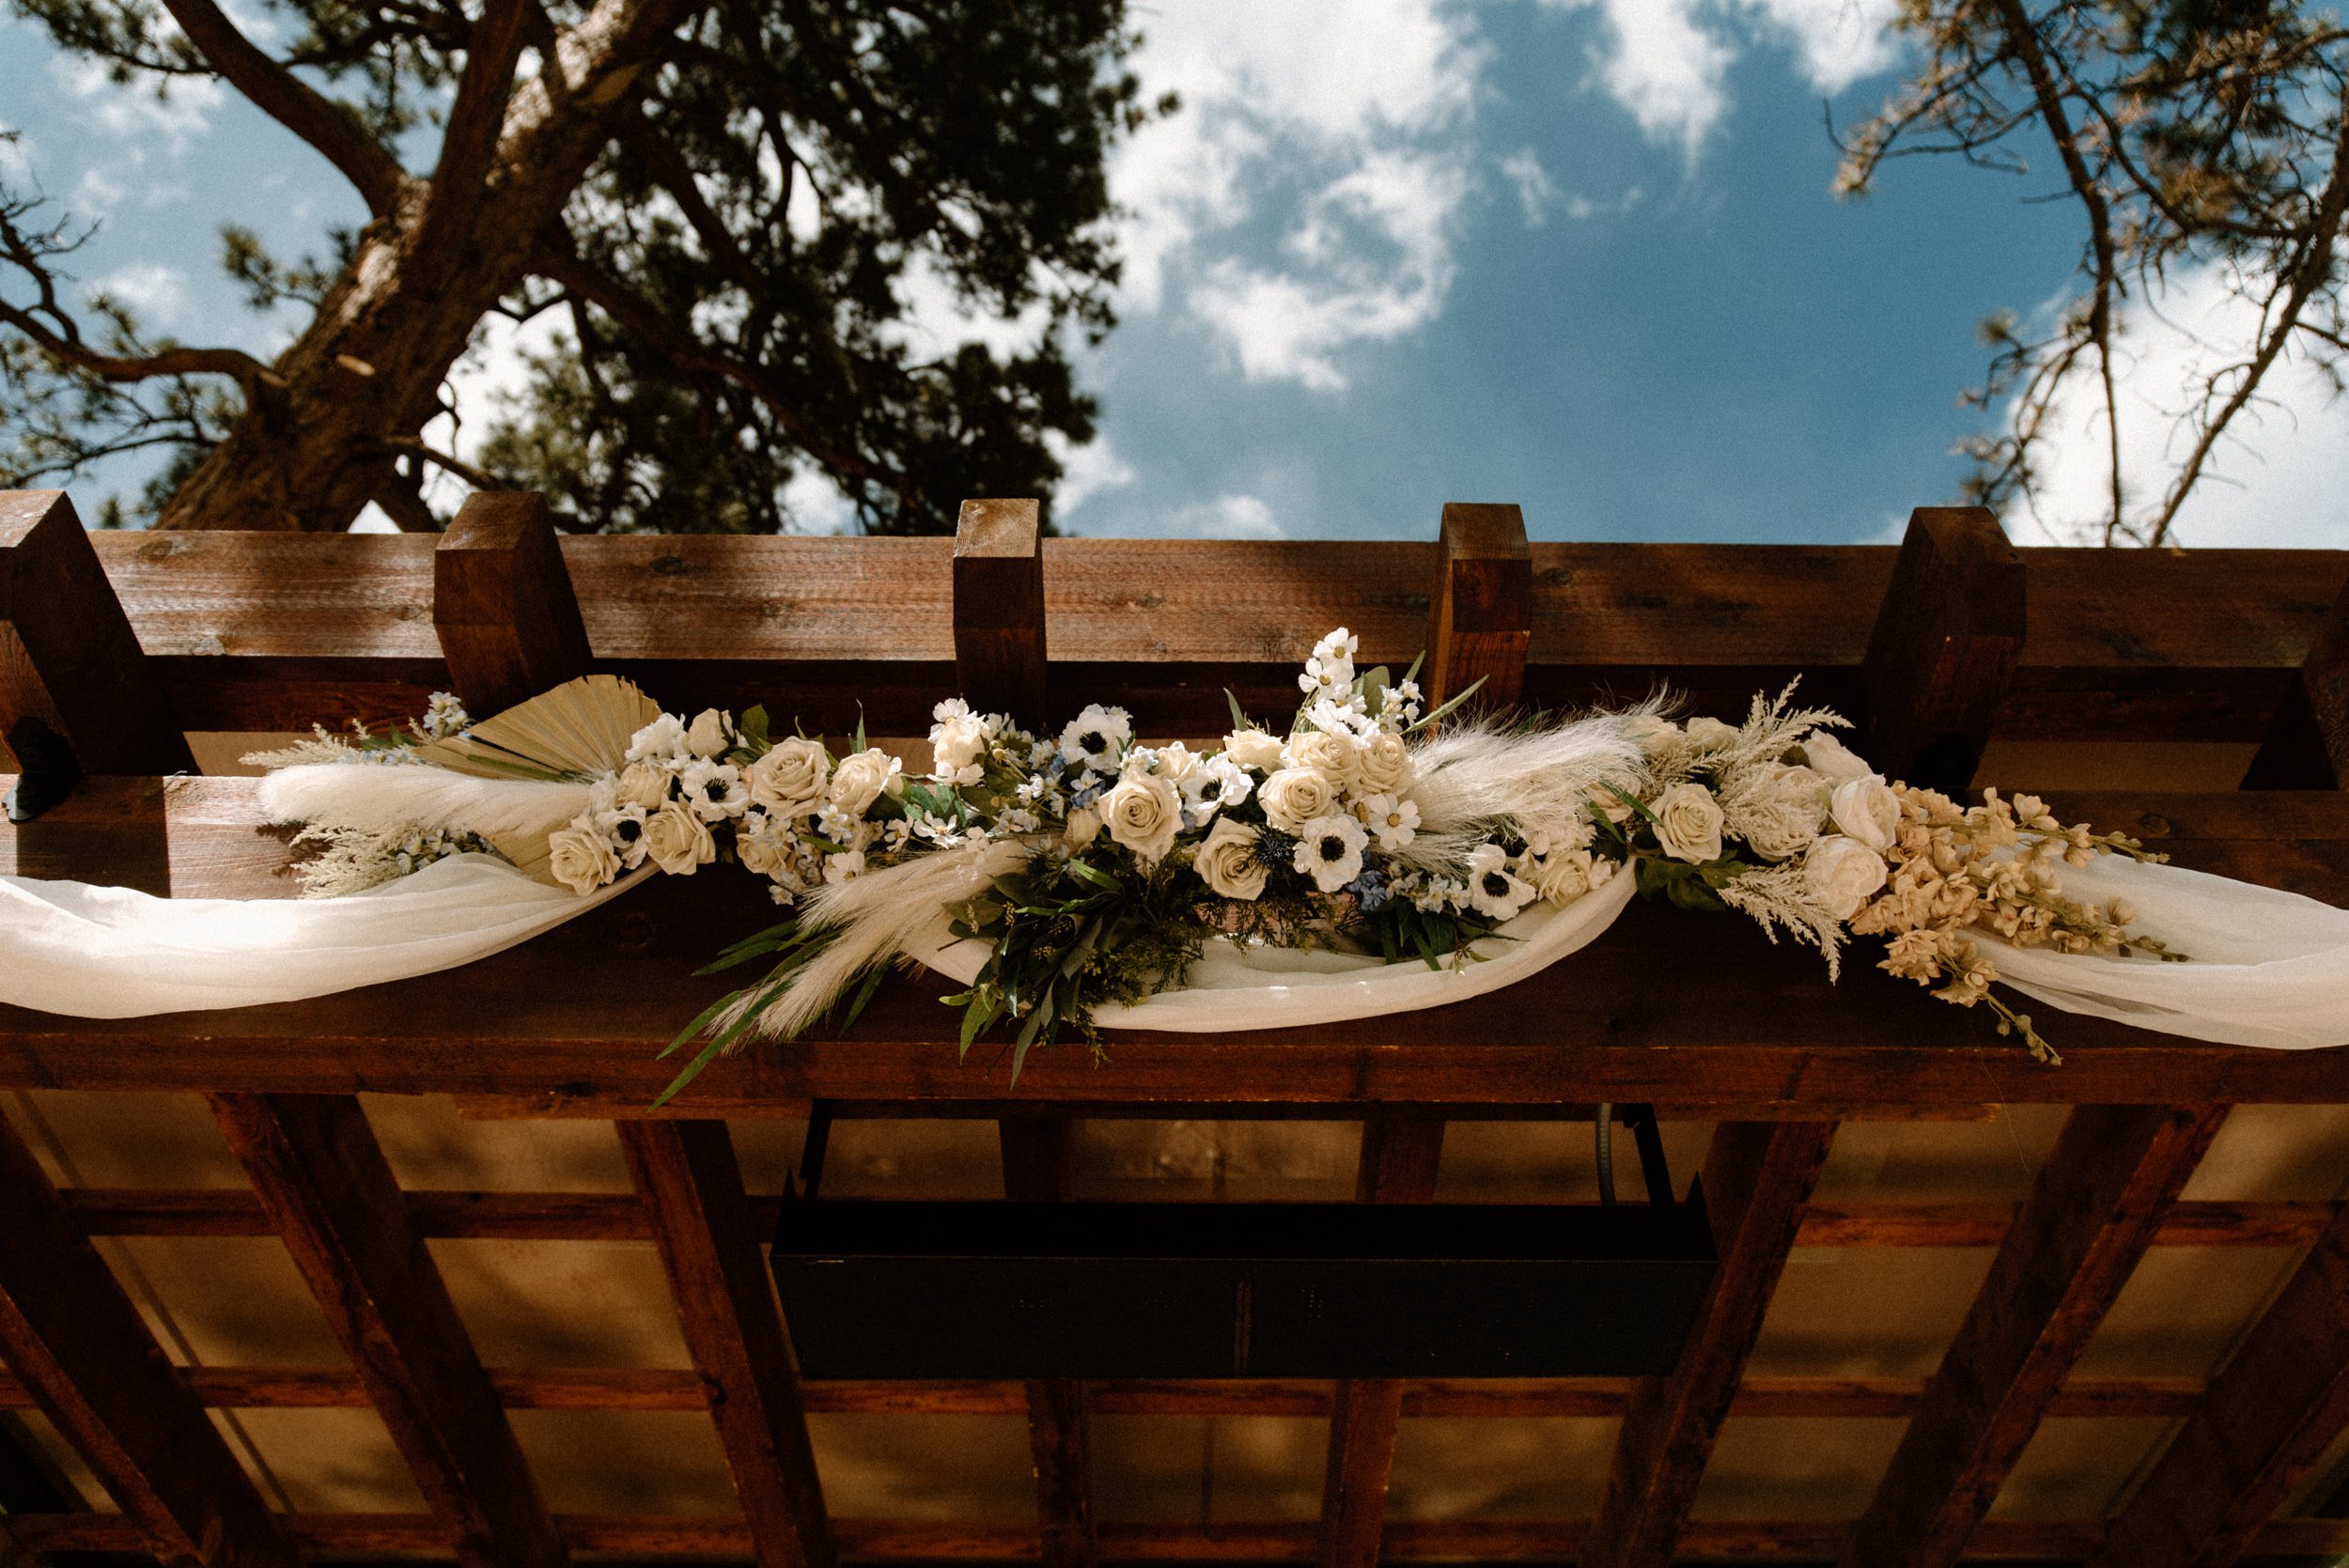 White and green florals decorate the wooden altar at Della Terra Mountain Chateau in Estes Park, CO